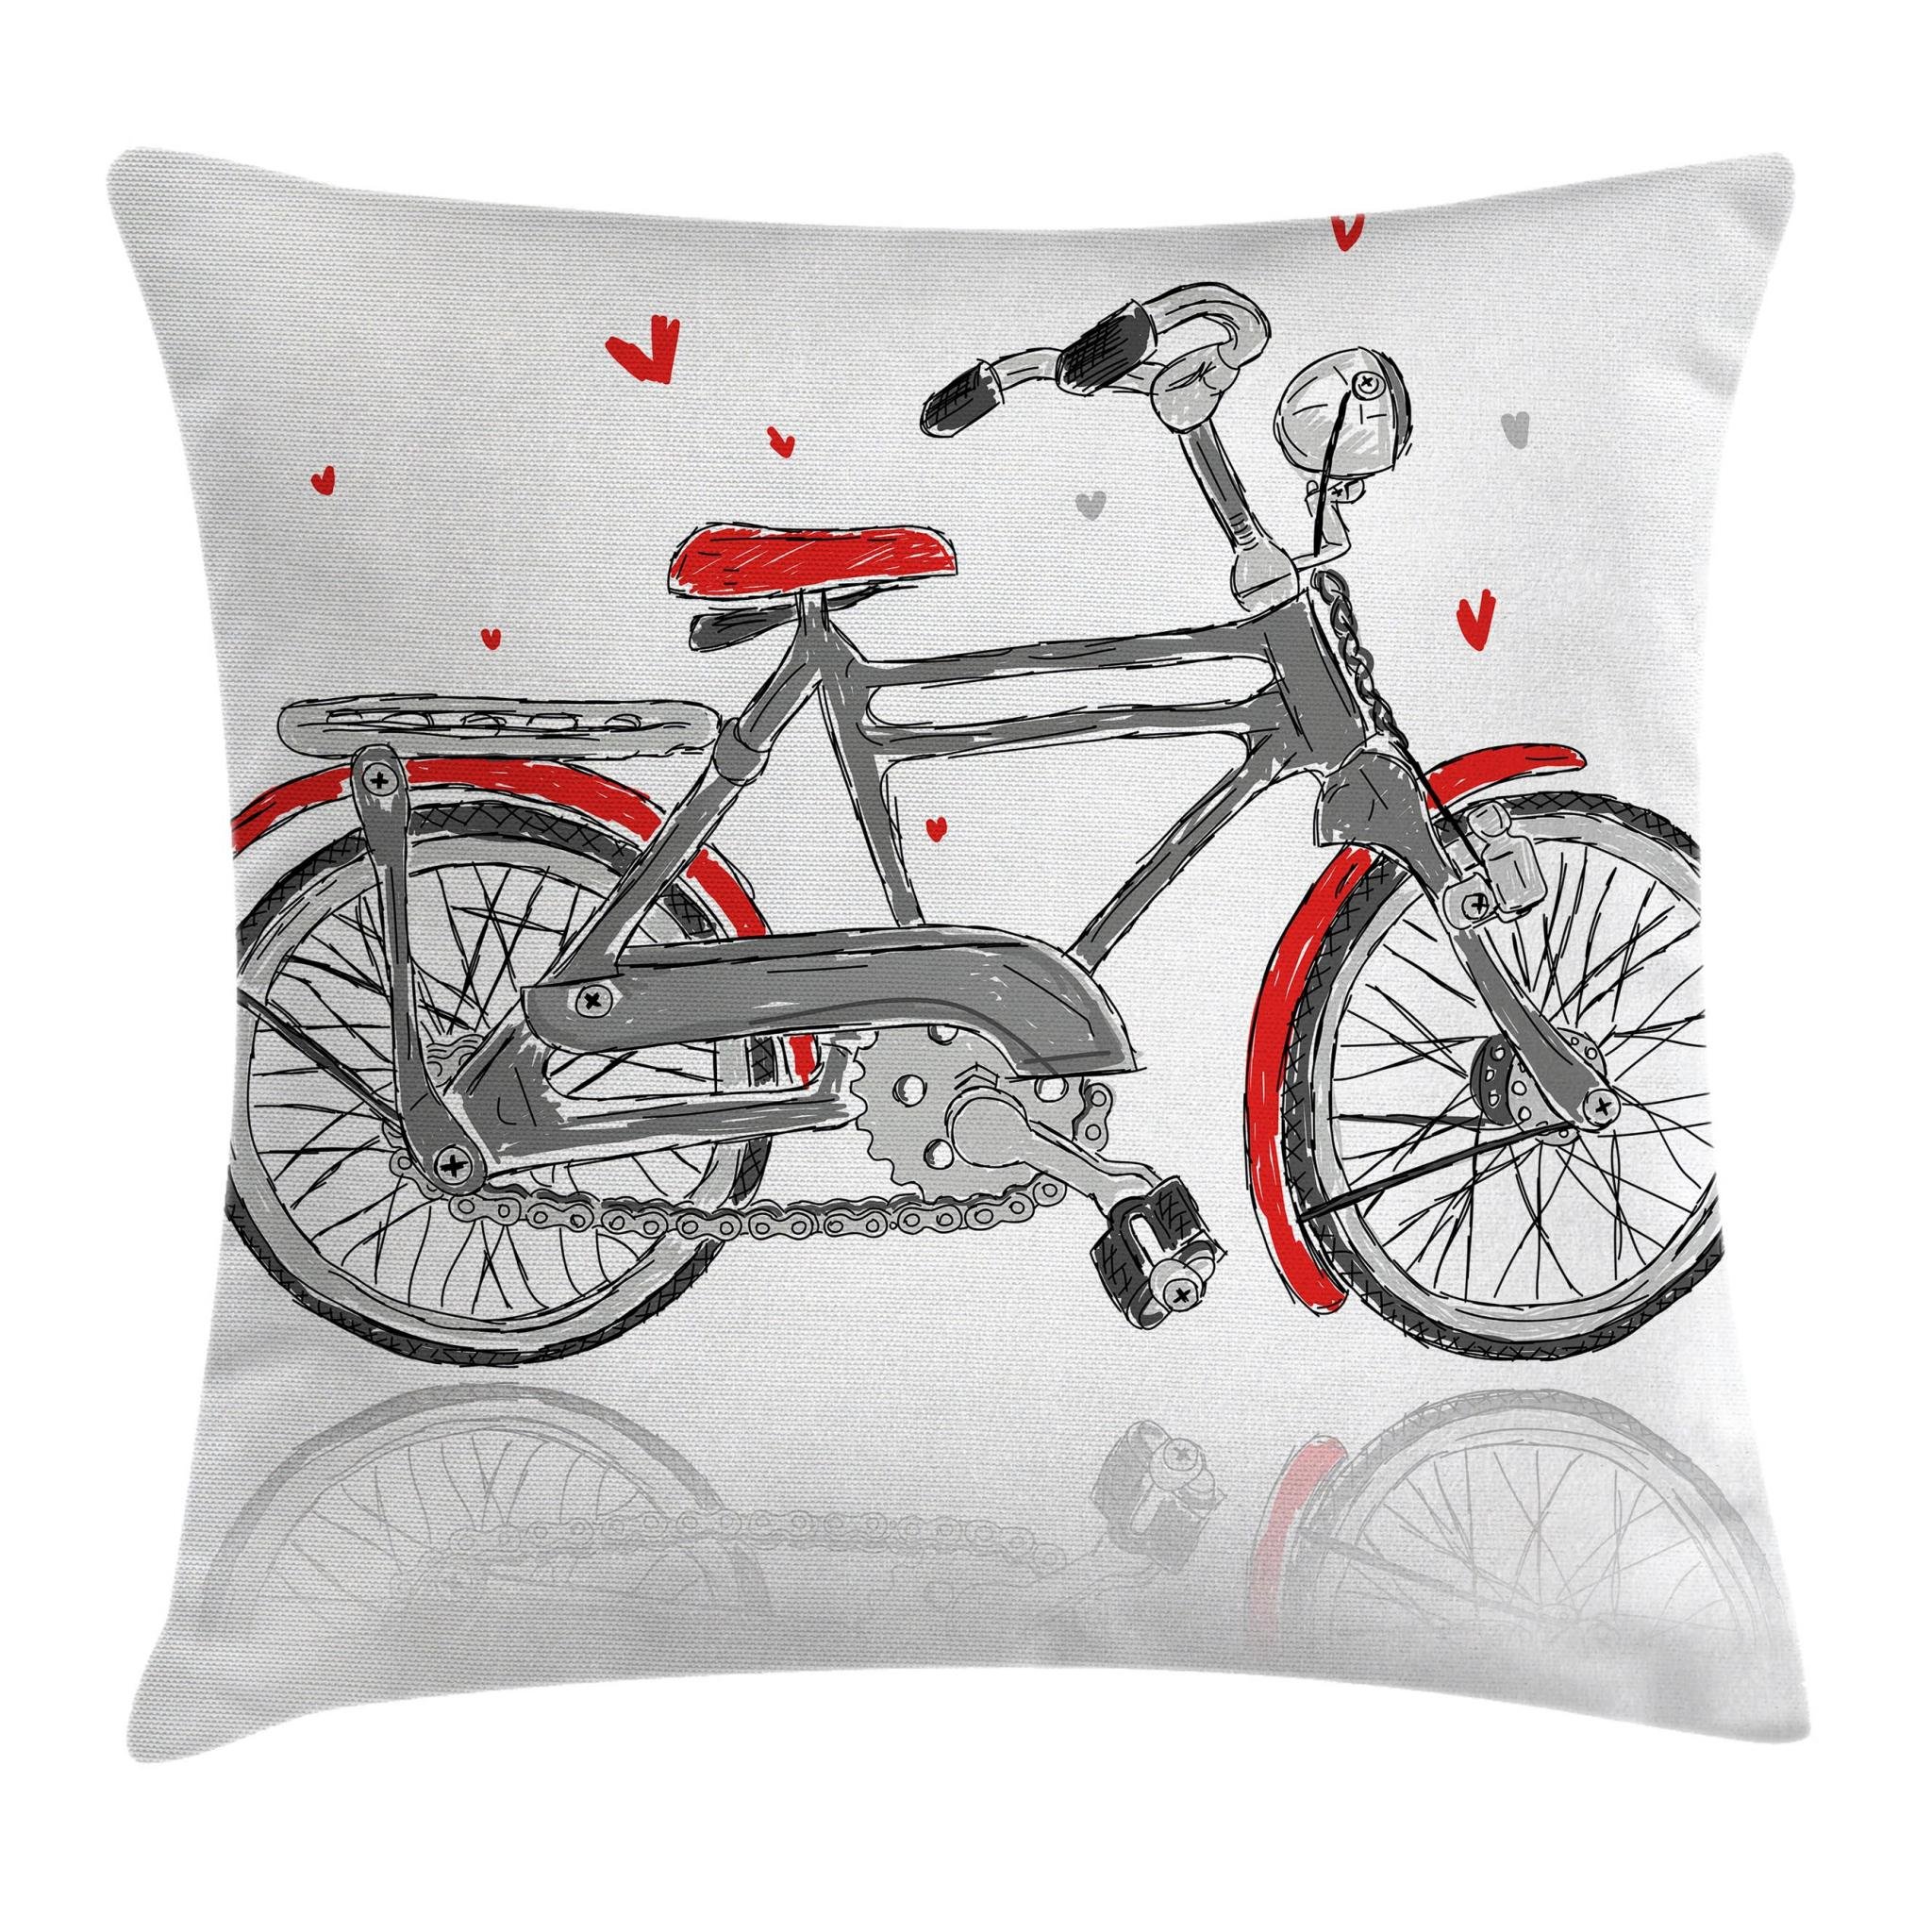 Ambesonne Romantic Throw Pillow Cushion Cover, Sketchy Hand Drawn Illustration Of A Bicycle Vintage Bike Hearts Art Print, Decor